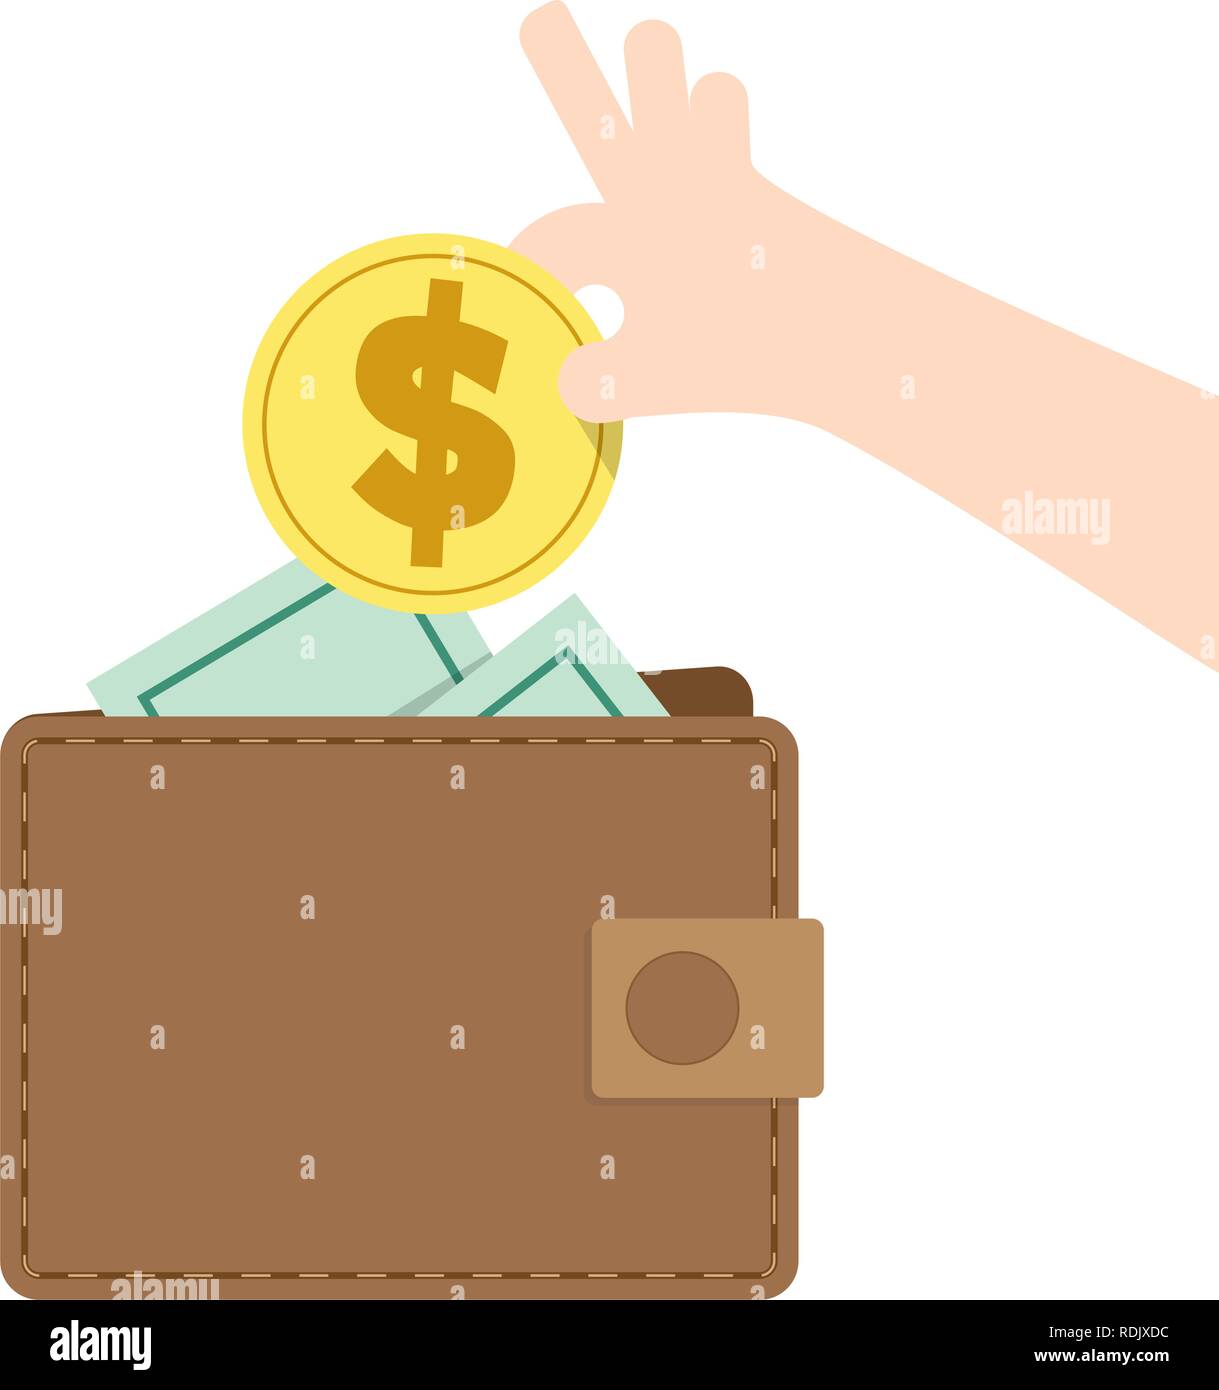 Illustration vector saving money and spending with wallet. Finance Concept. Stock Vector